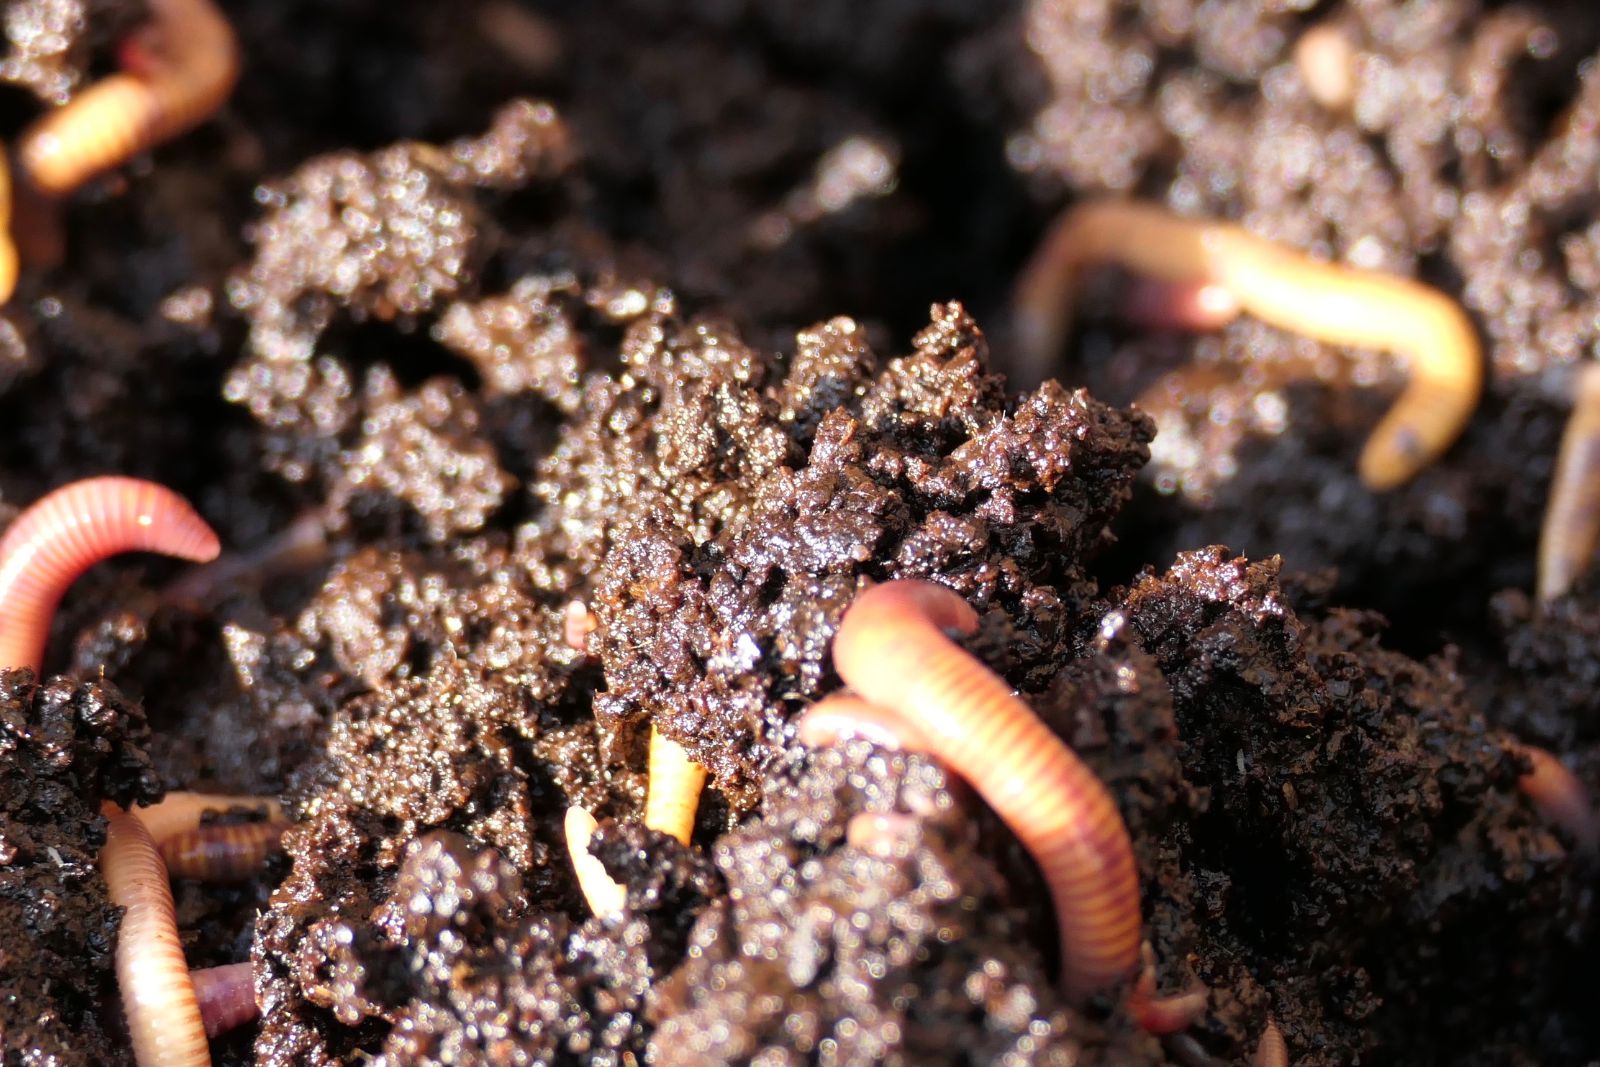 Red wiggler worms are often used in vermicomposting